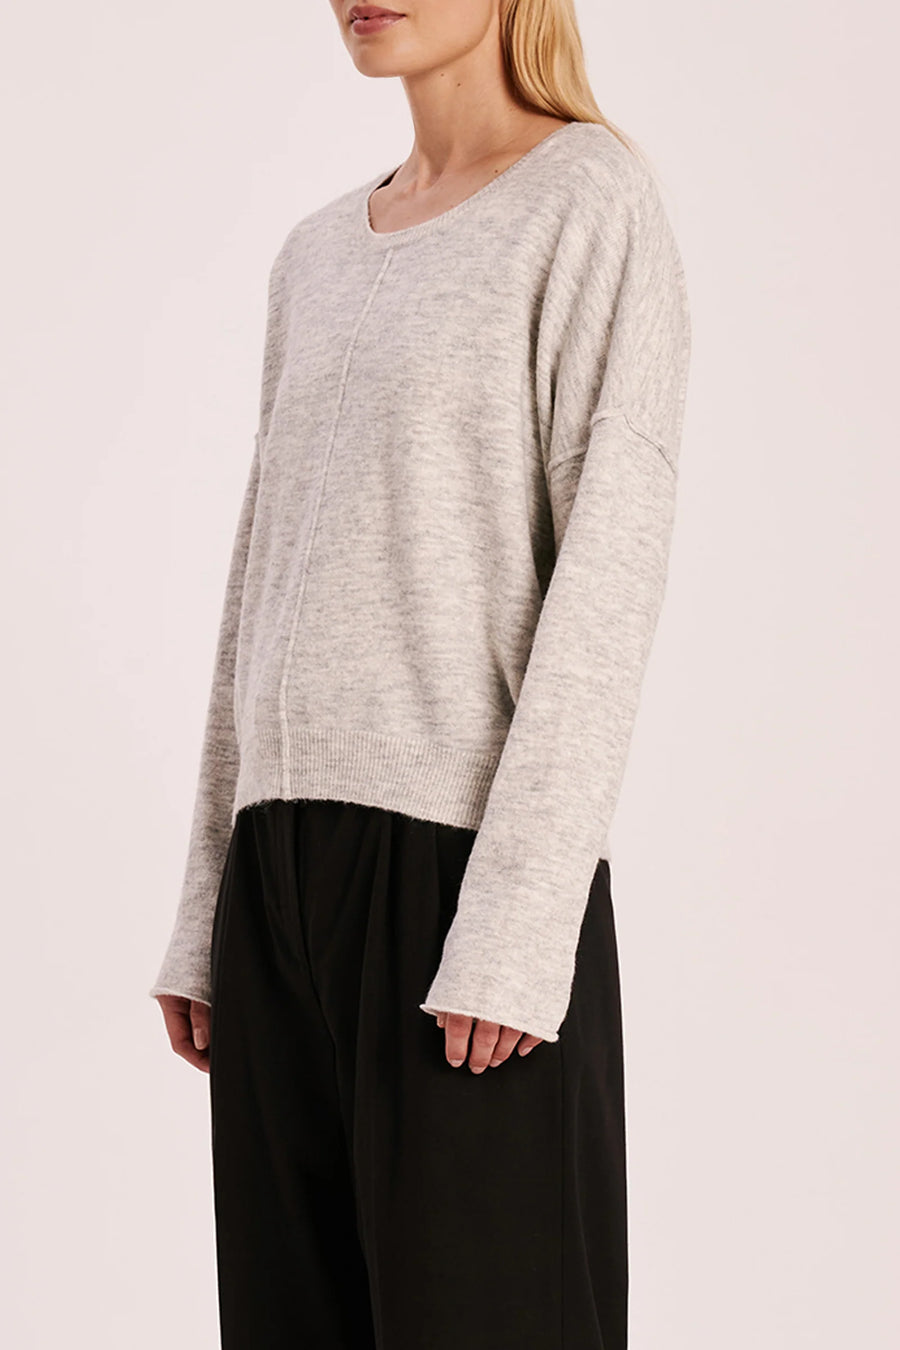 Nude Lucy II REMY Knit - Grey Marle